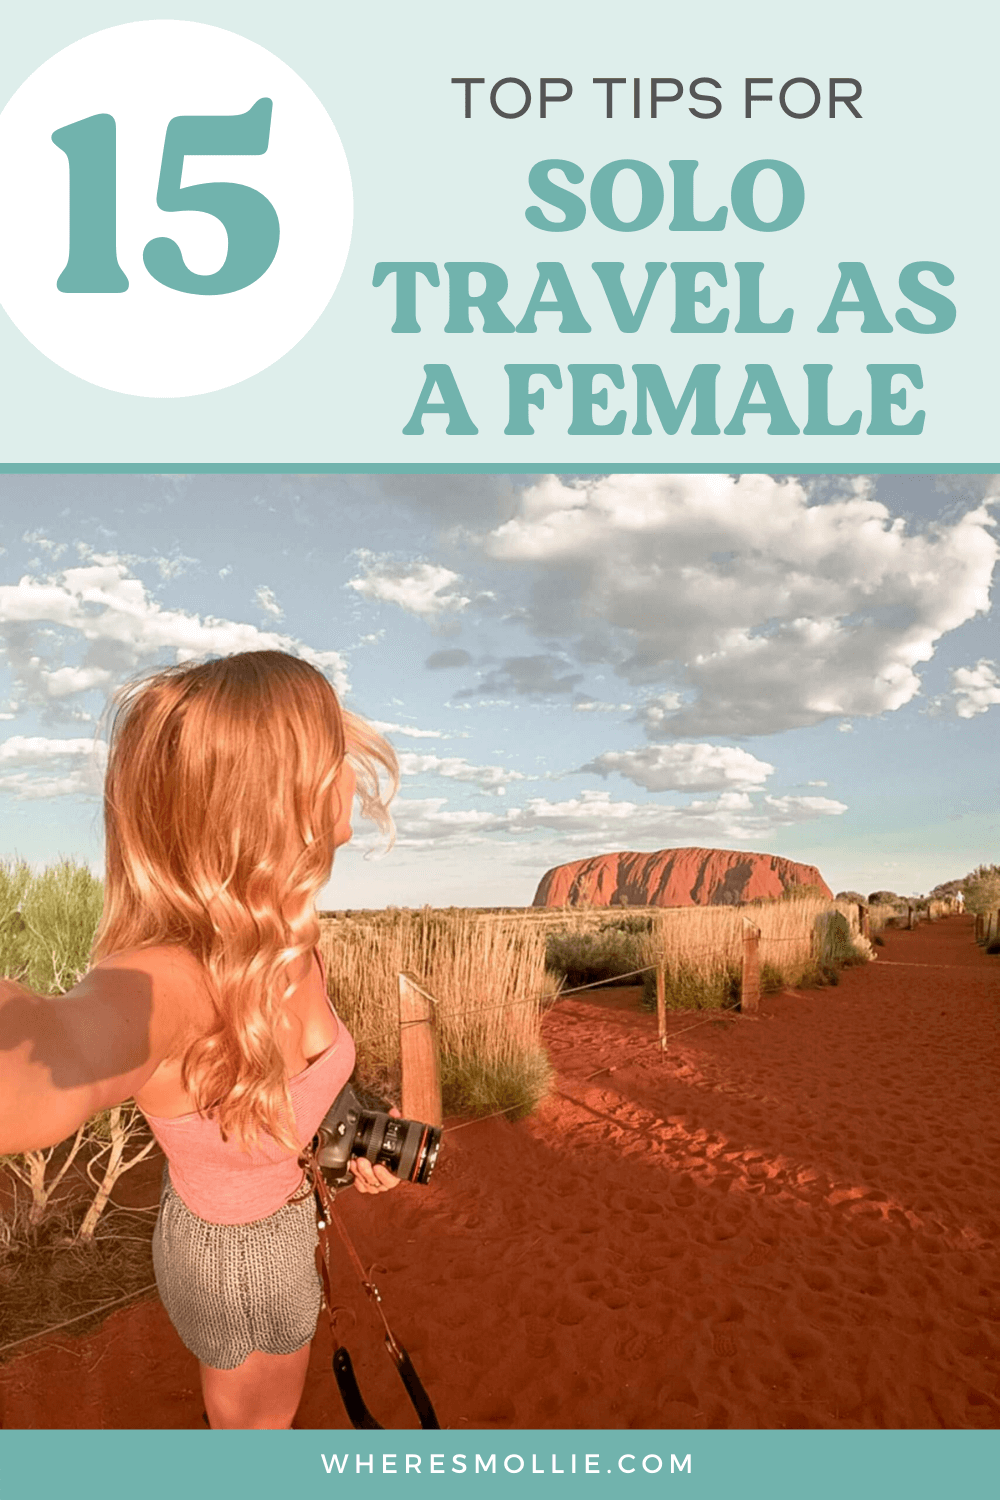 Top tips for travelling solo as a female